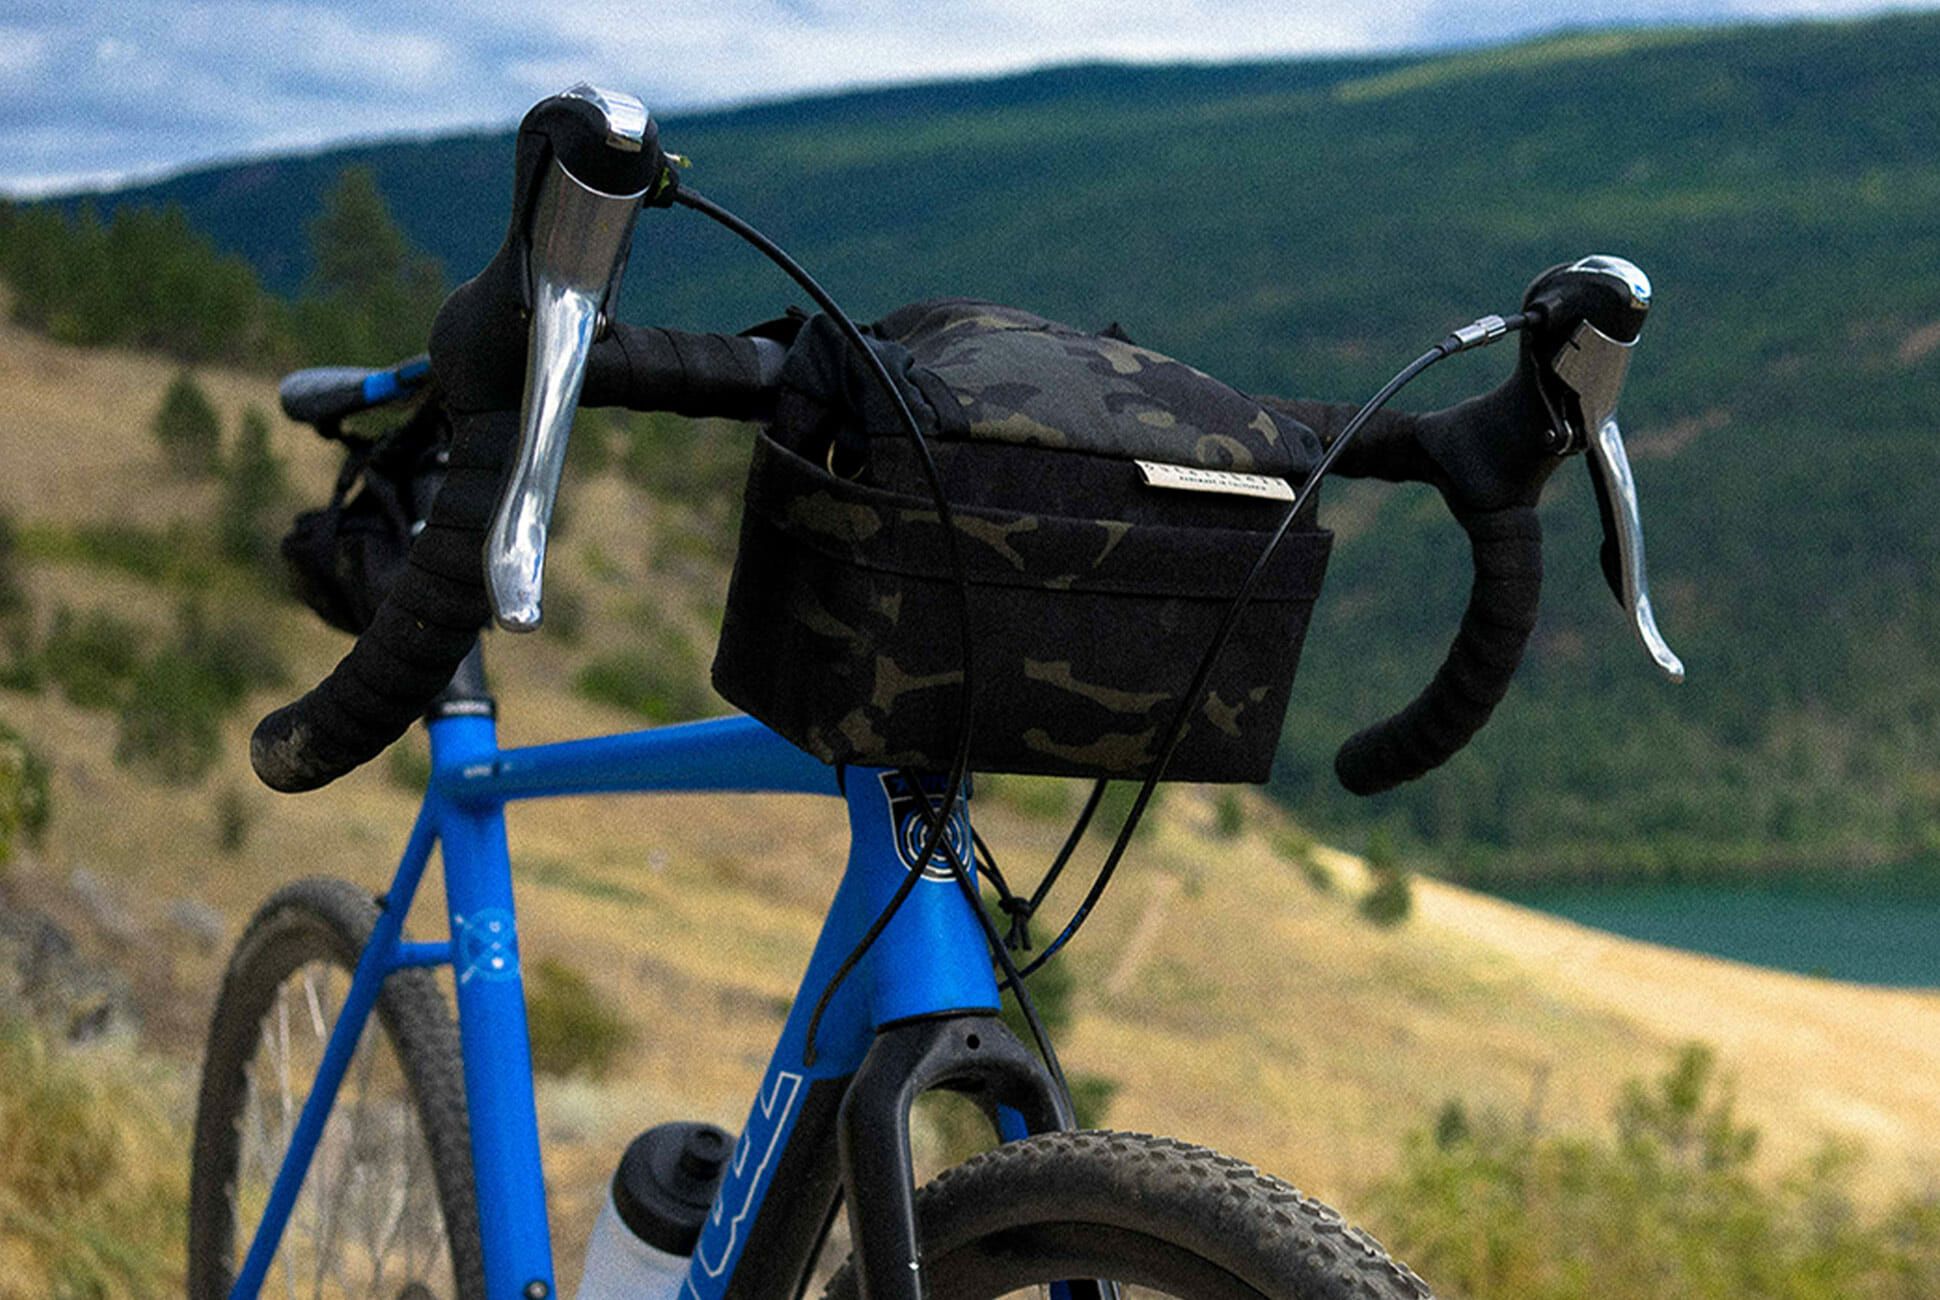 This Handlebar Bag Makes Access on the Fly a Breeze